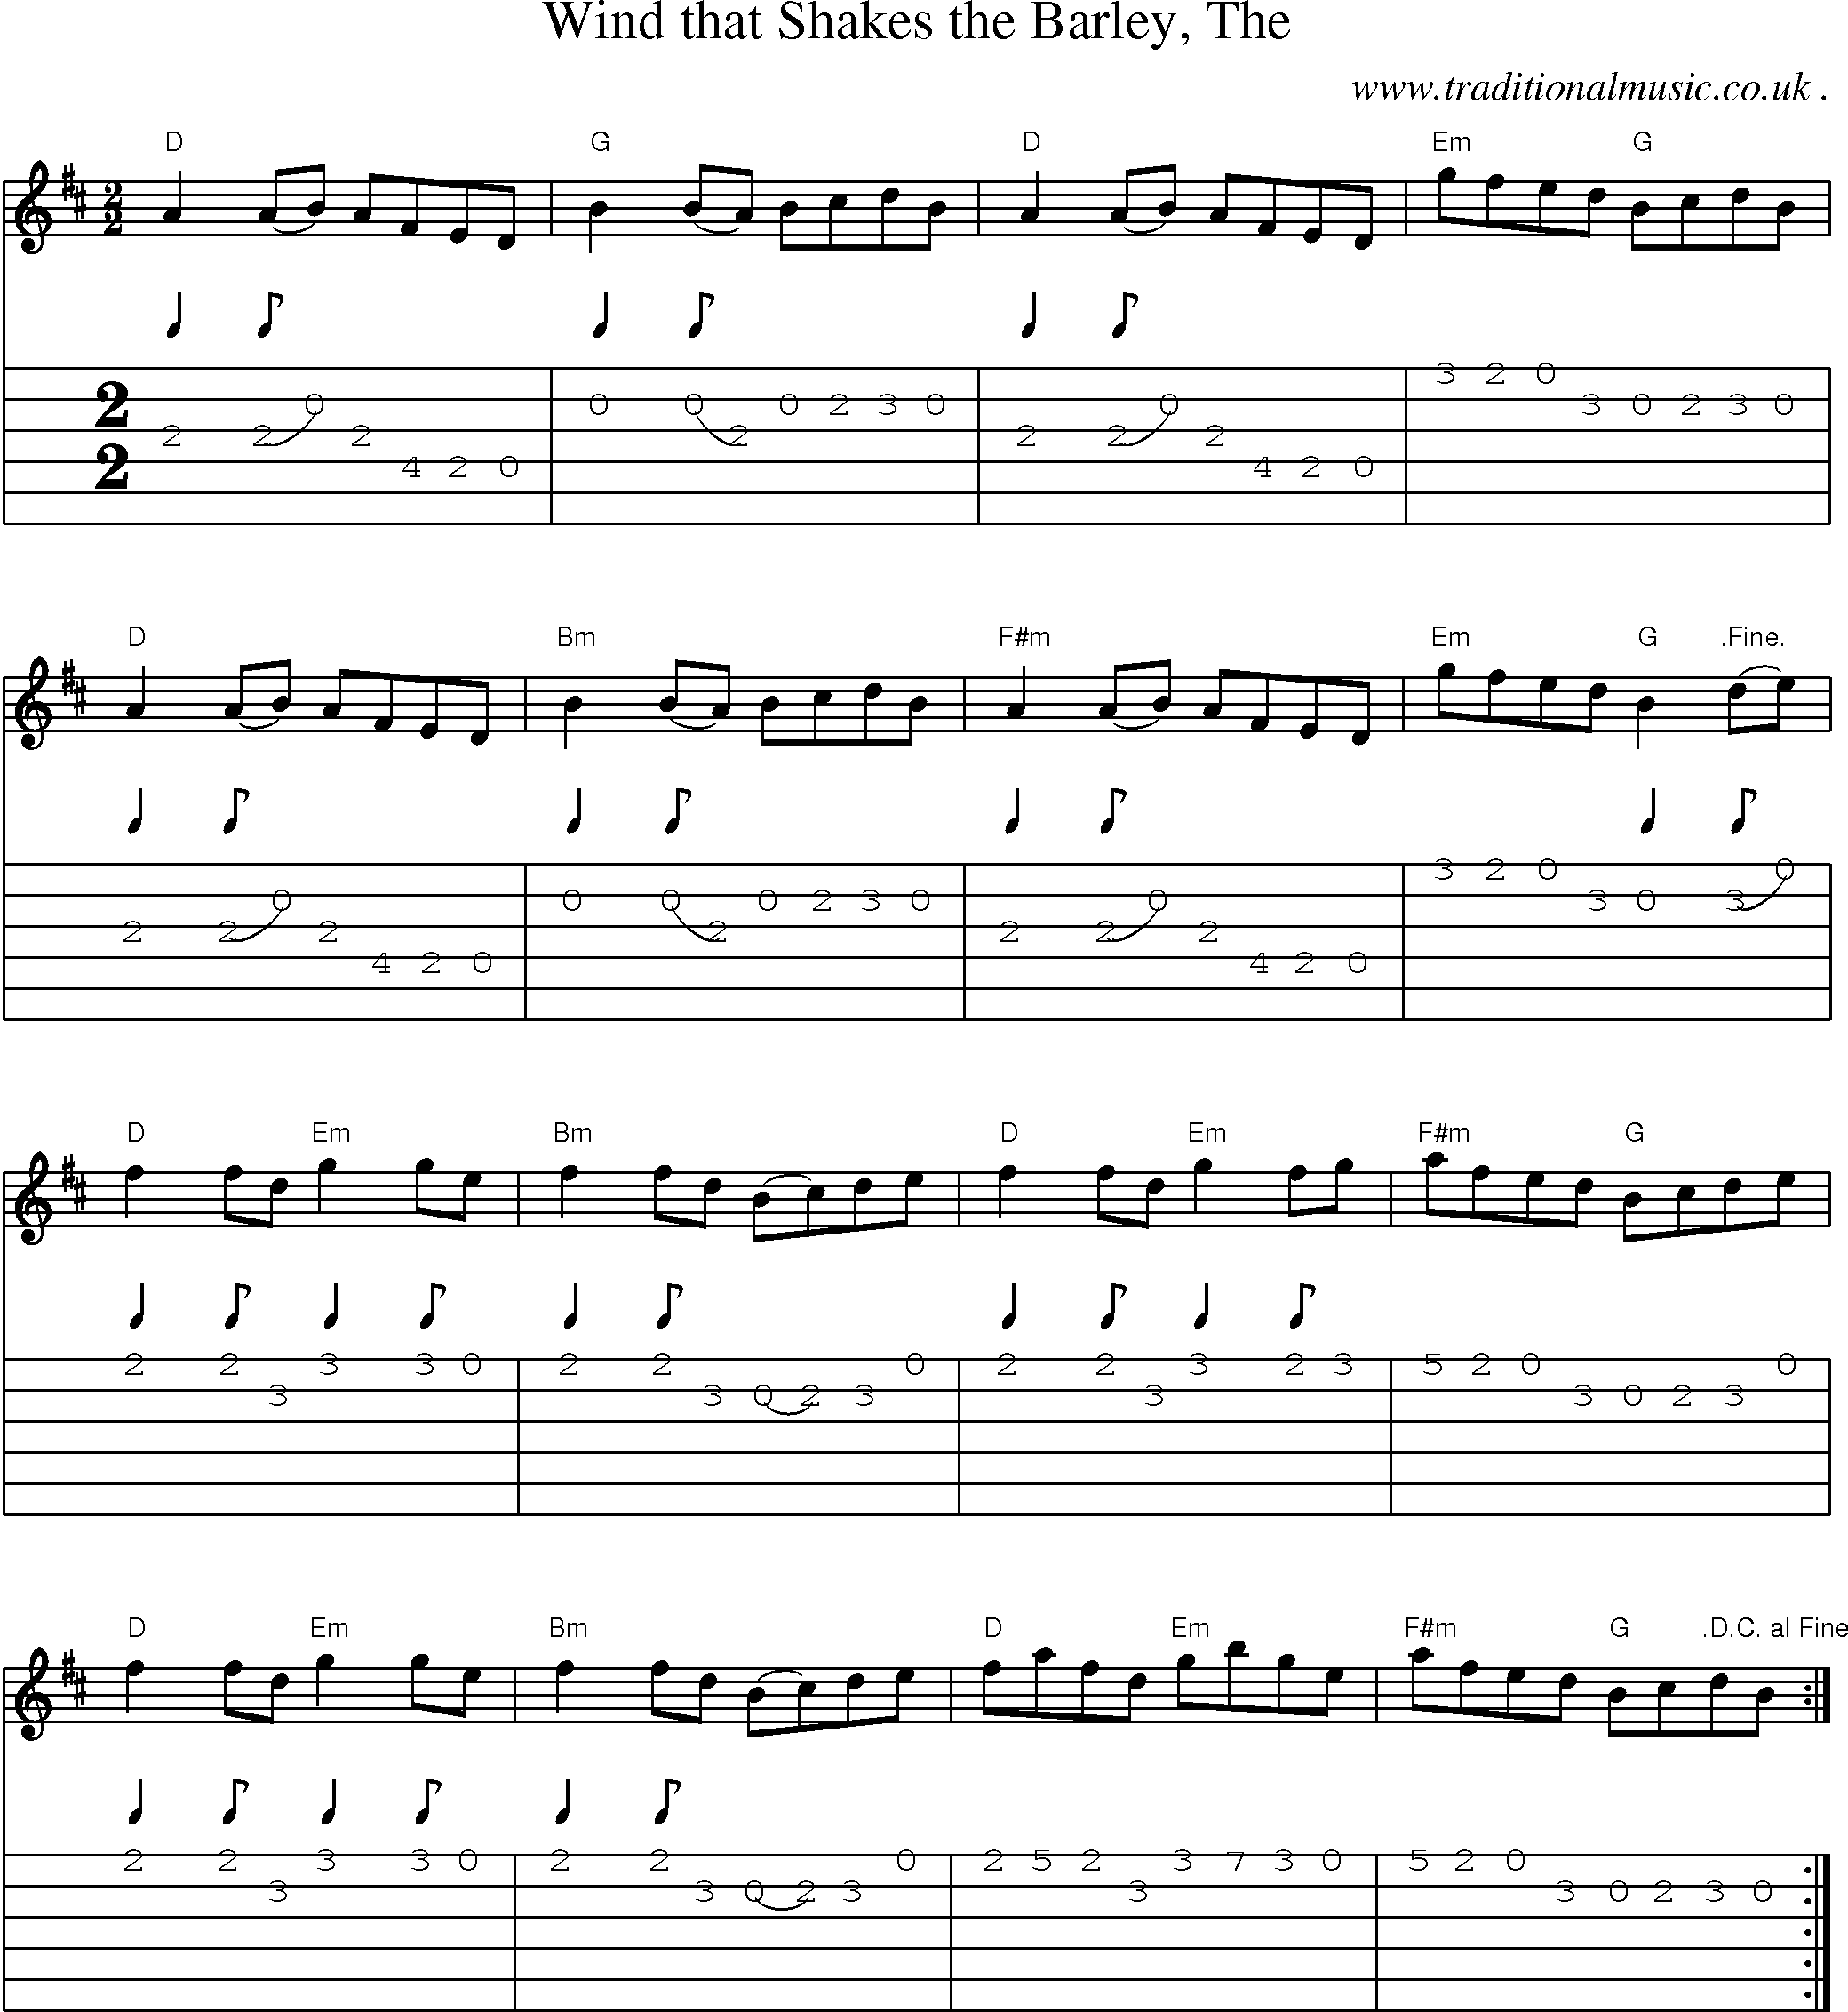 Music Score and Guitar Tabs for Wind that Shakes the Barley The